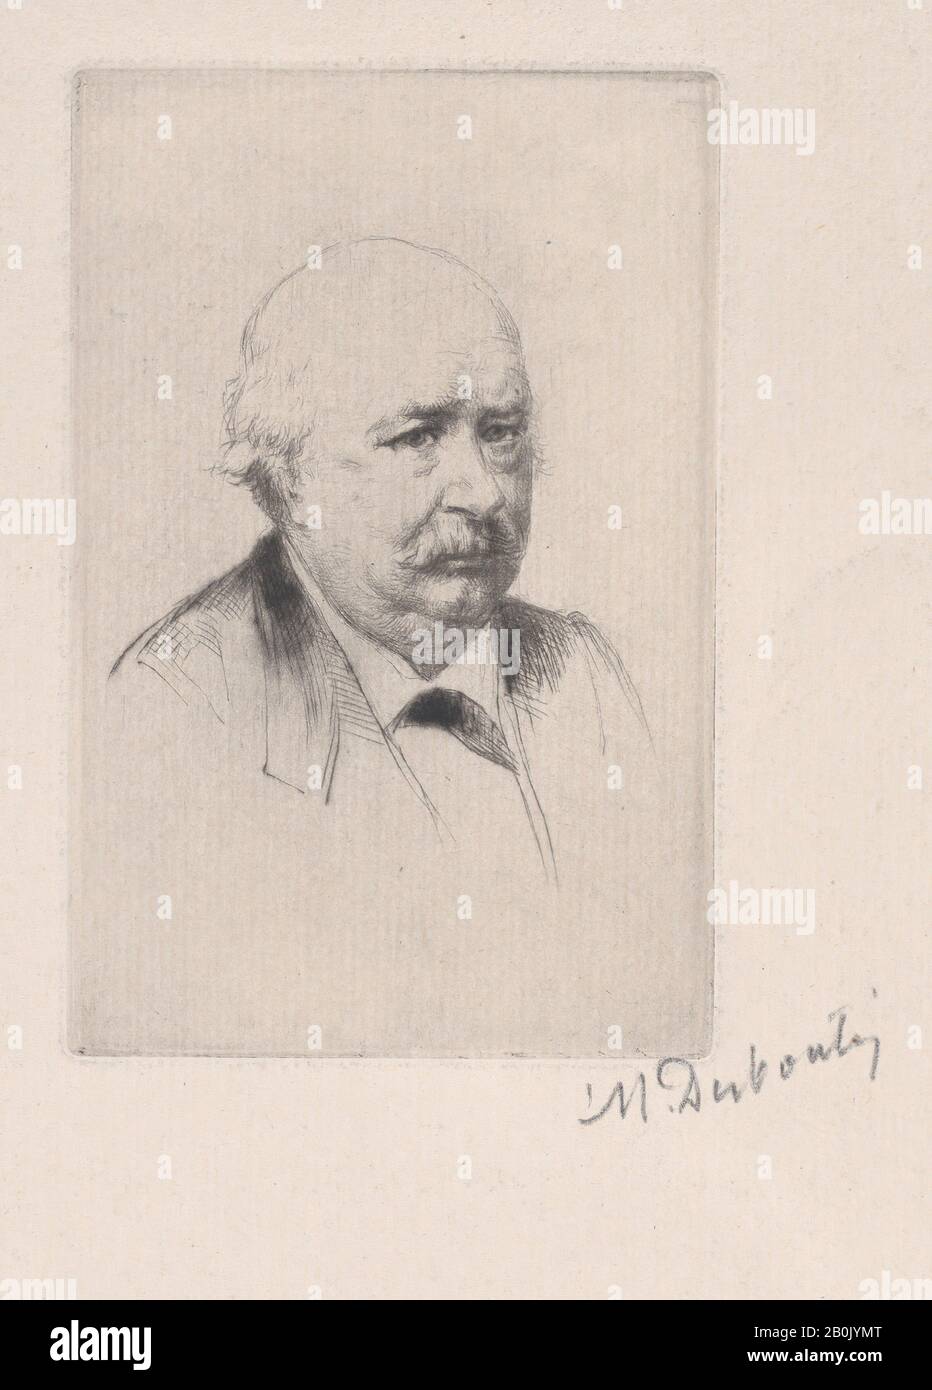 Marcellin-Gilbert Desboutin, Portrait of Jules Sandeau, Marcellin-Gilbert Desboutin (French, Cérilly 1823–1902 Nice), 1879, Drypoint, Sheet: 14 1/8 × 9 15/16 in. (35.8 × 25.3 cm), Plate: 4 5/8 × 3 1/16 in. (11.8 × 7.7 cm), Prints Stock Photo